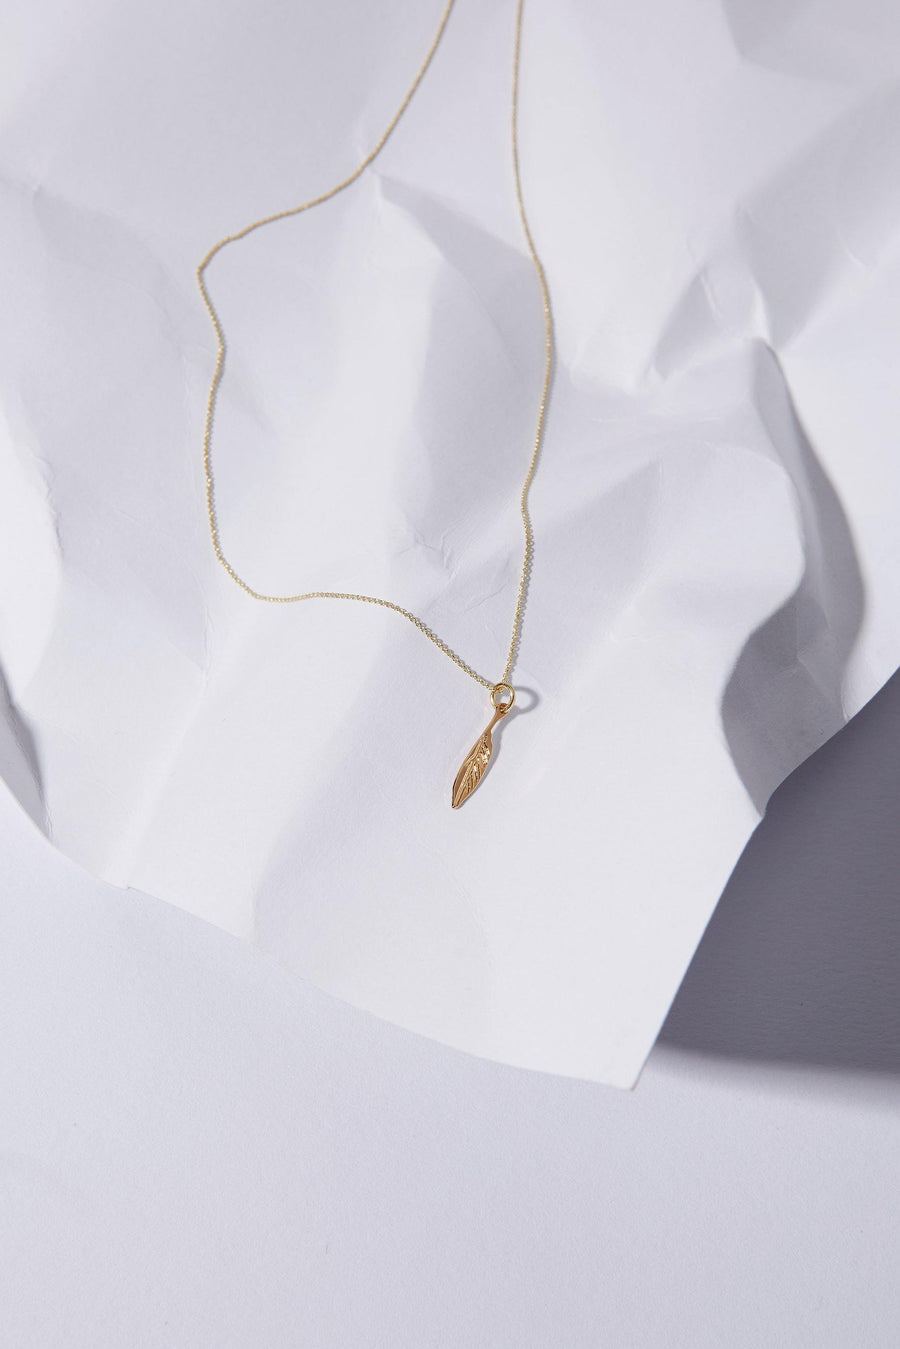 Mini Good Feather Necklace - The Good Store Berlin